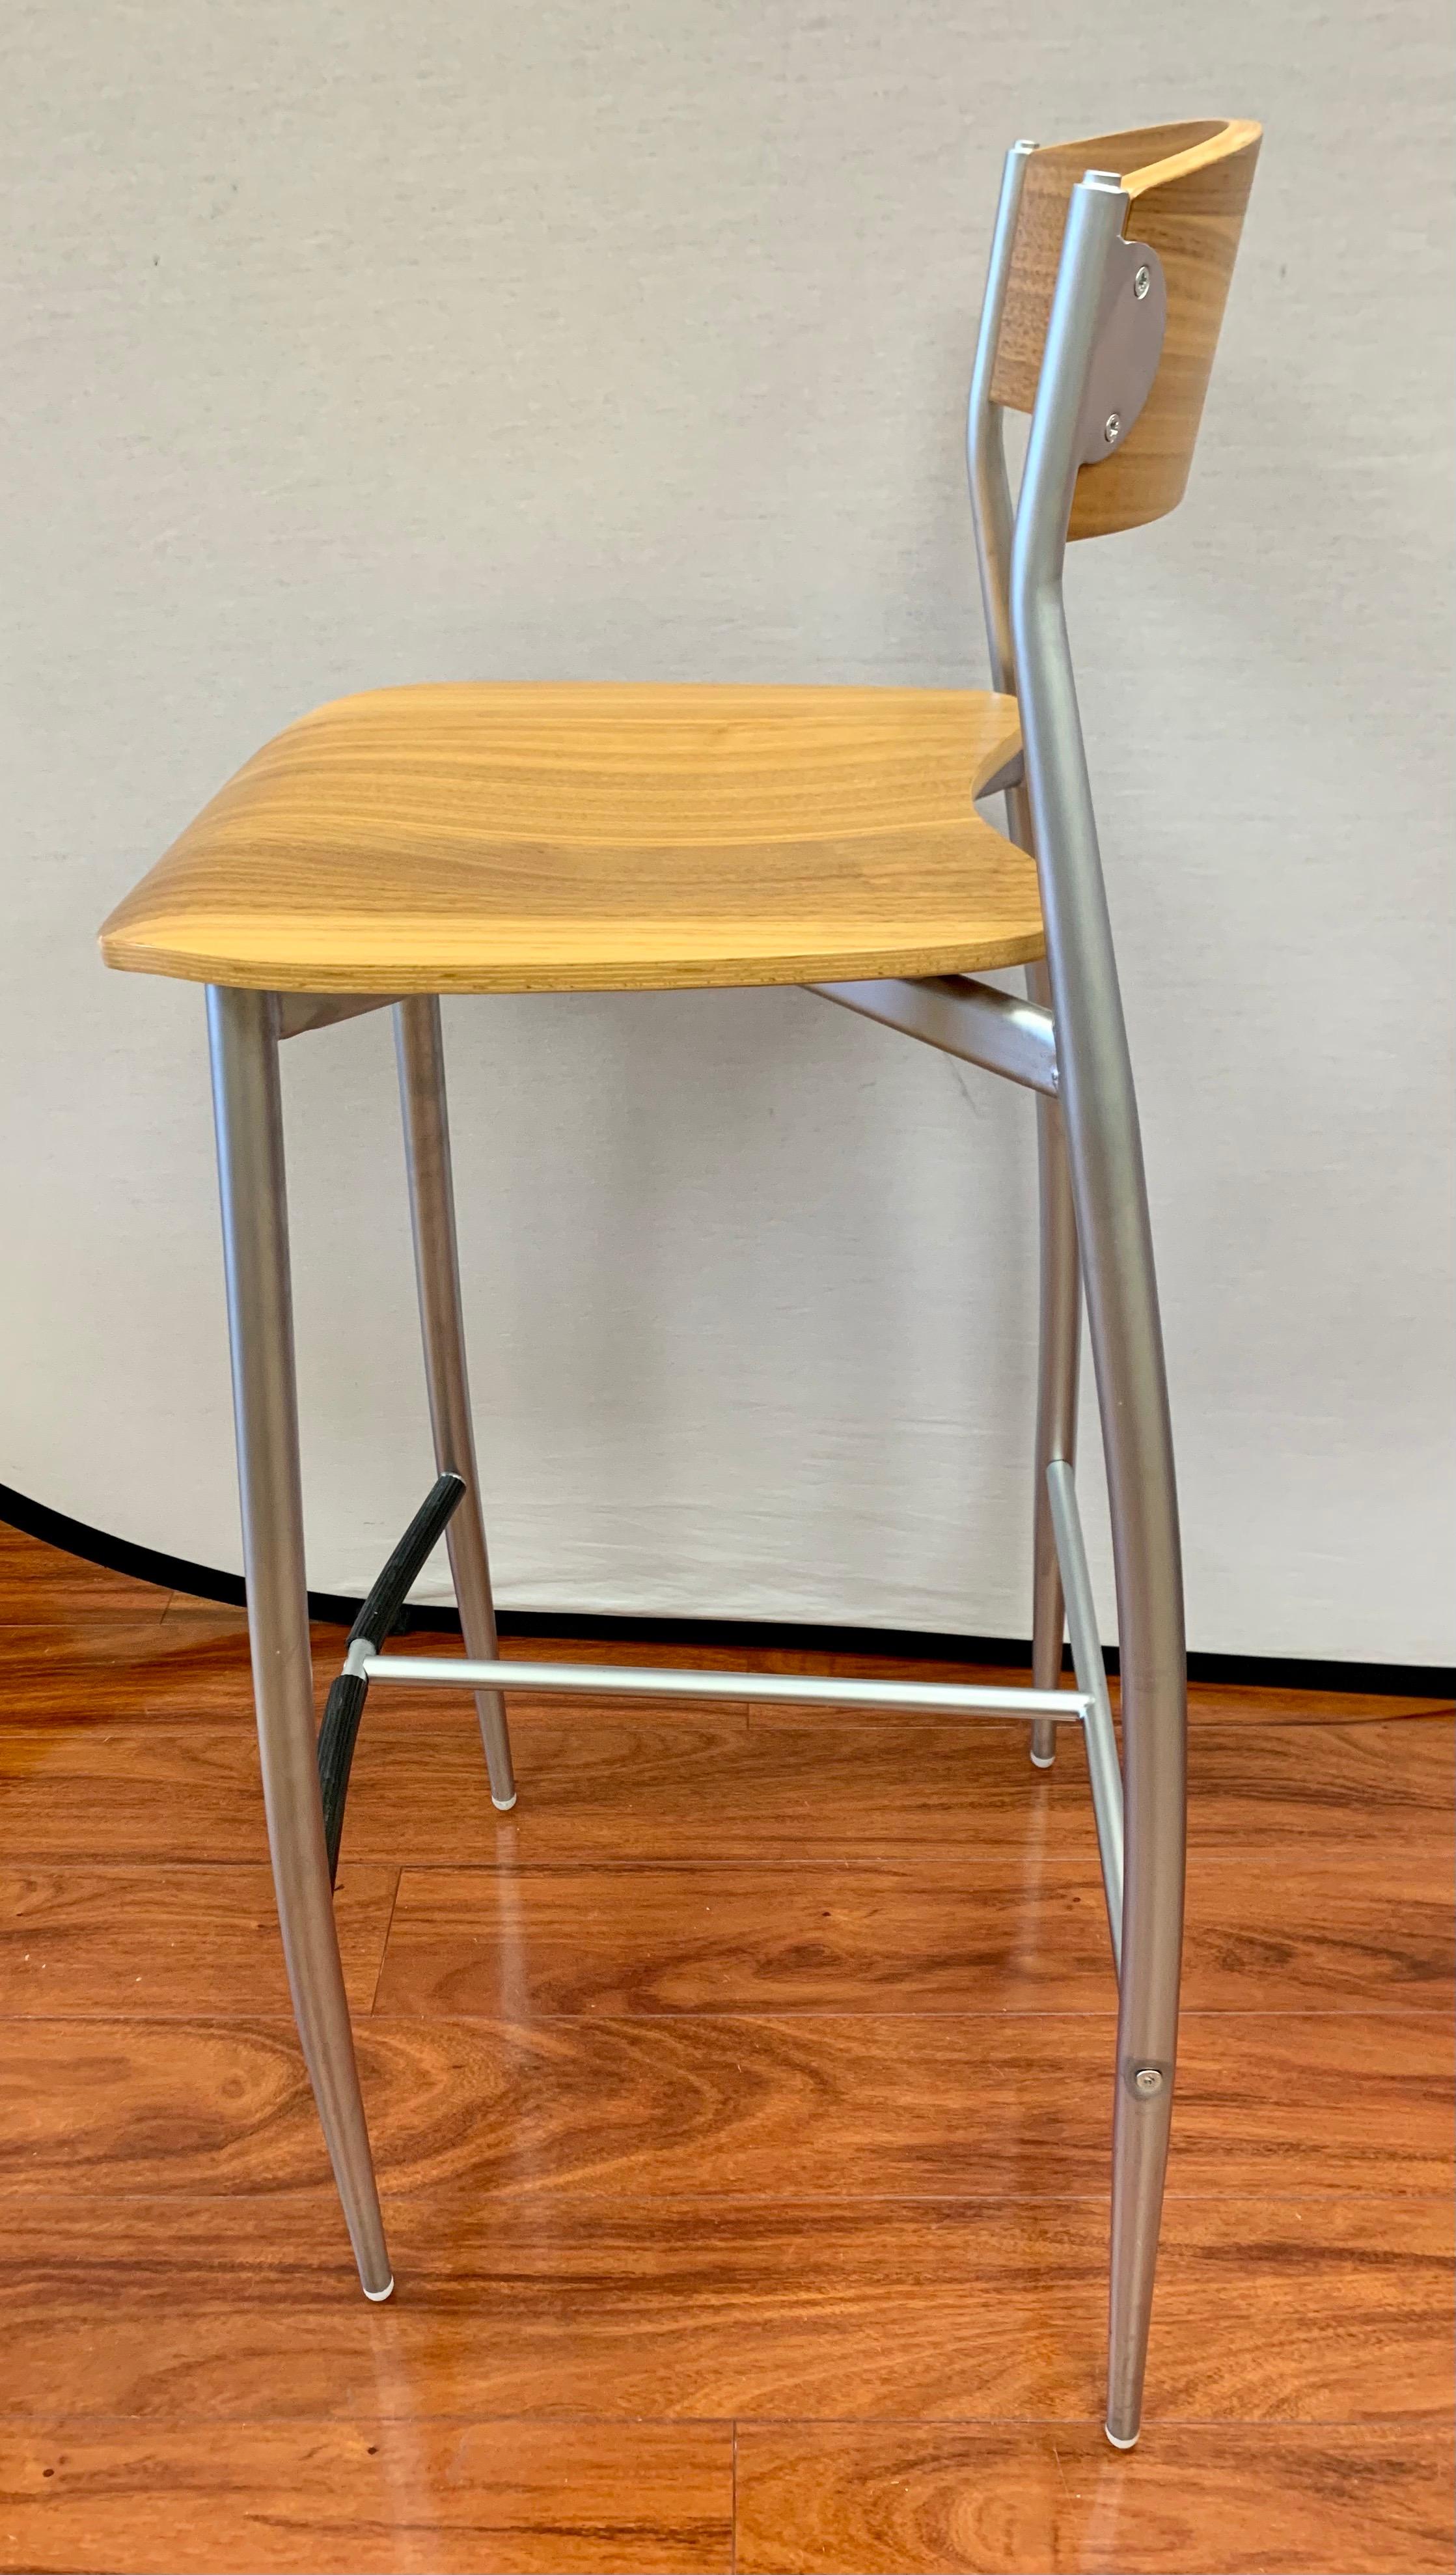 Italian Made in Italy by Altek Set of 4 Steel and Maple Bar Stools Design within Reach